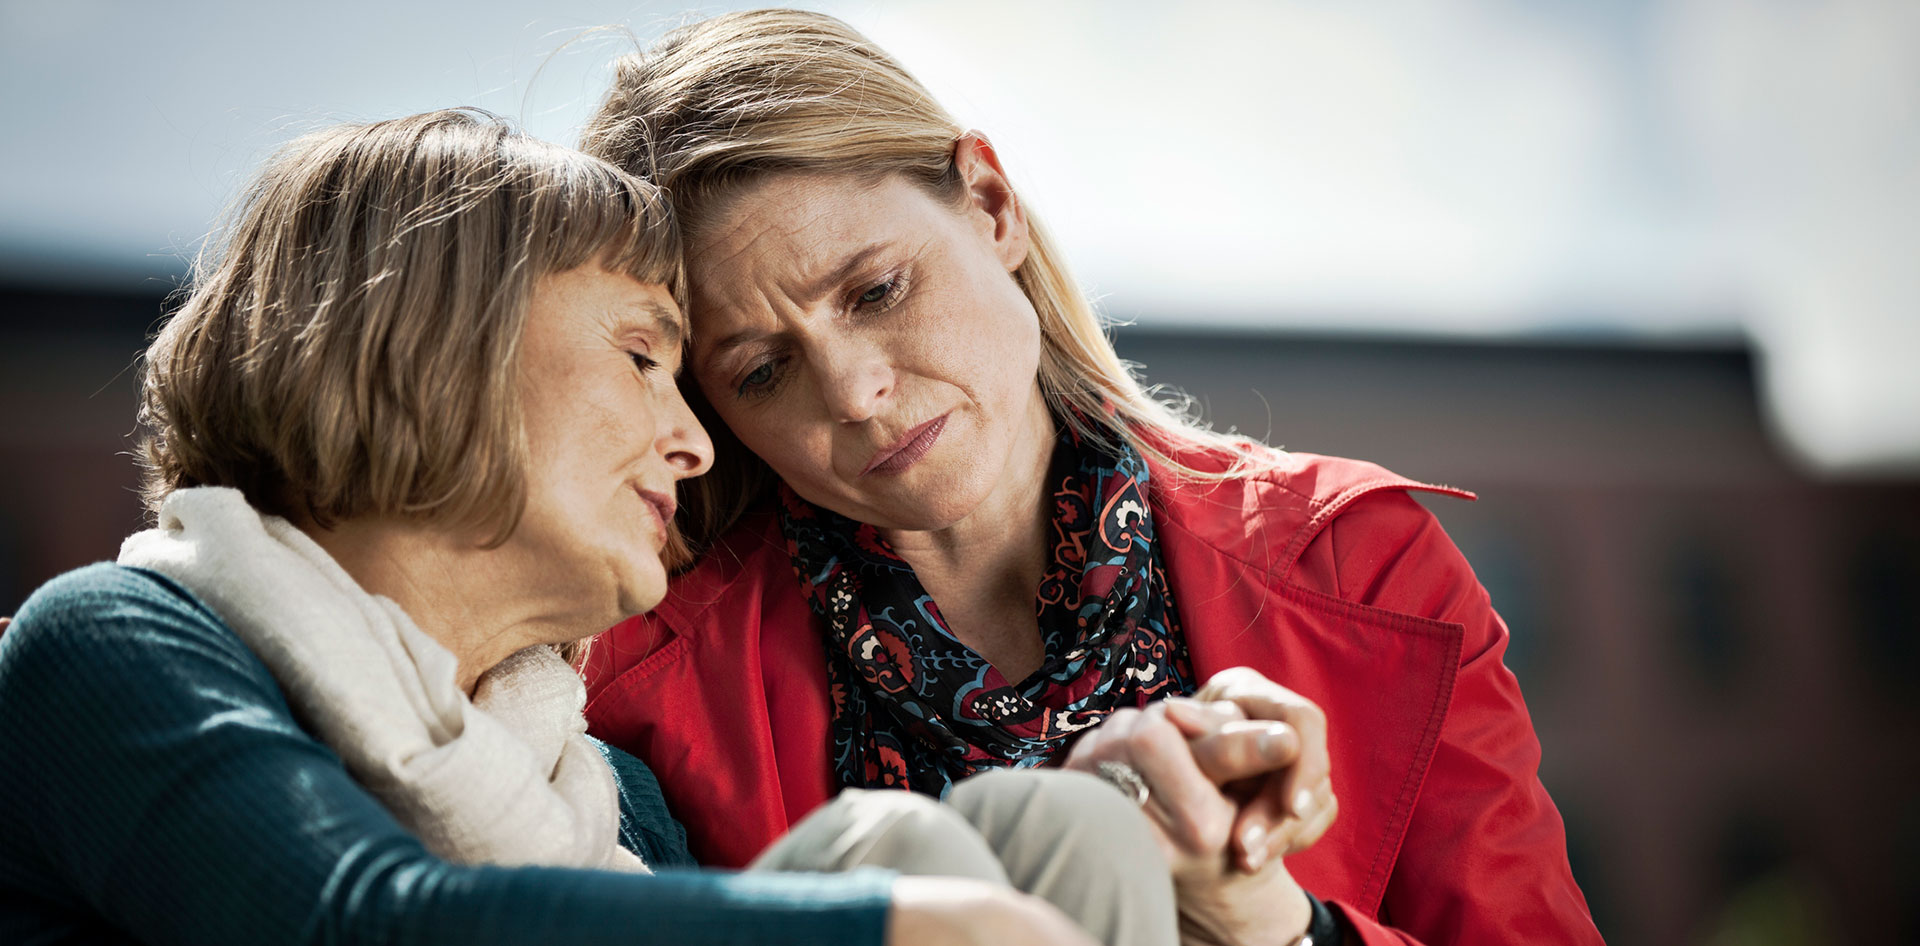 Mature middle aged woman caring for her elderly mother.